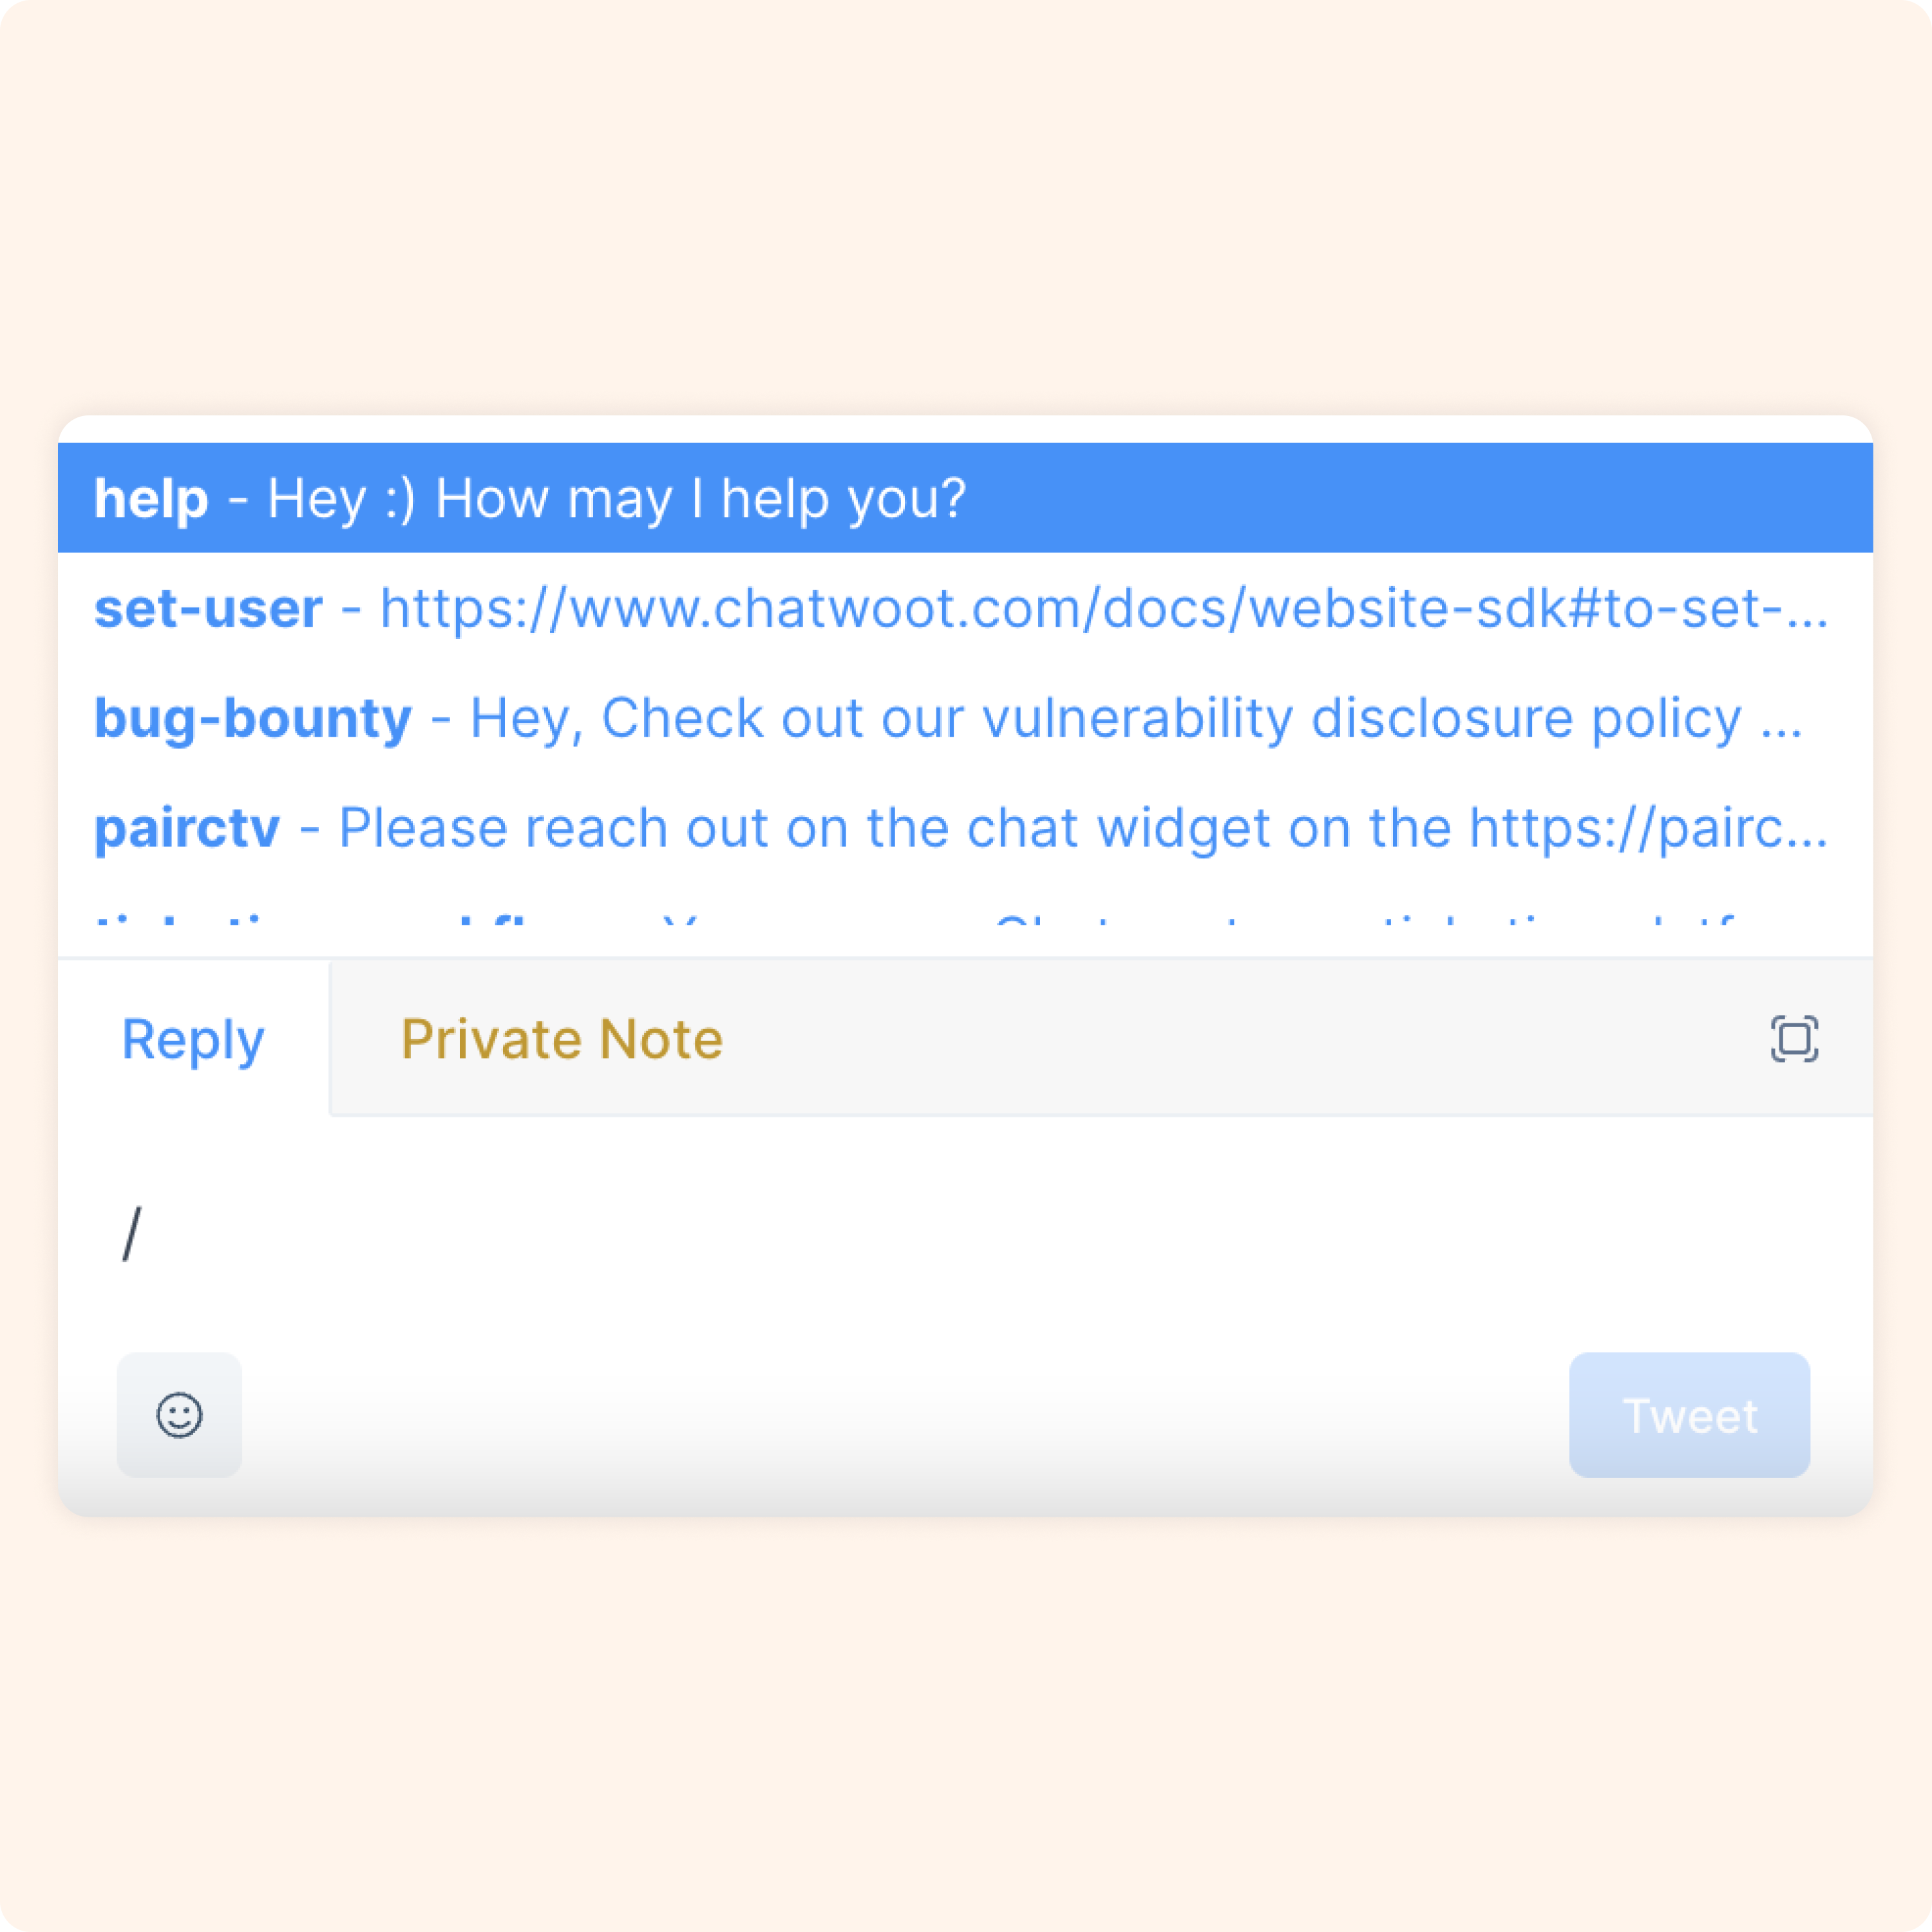 Access and use canned responses directly in conversations